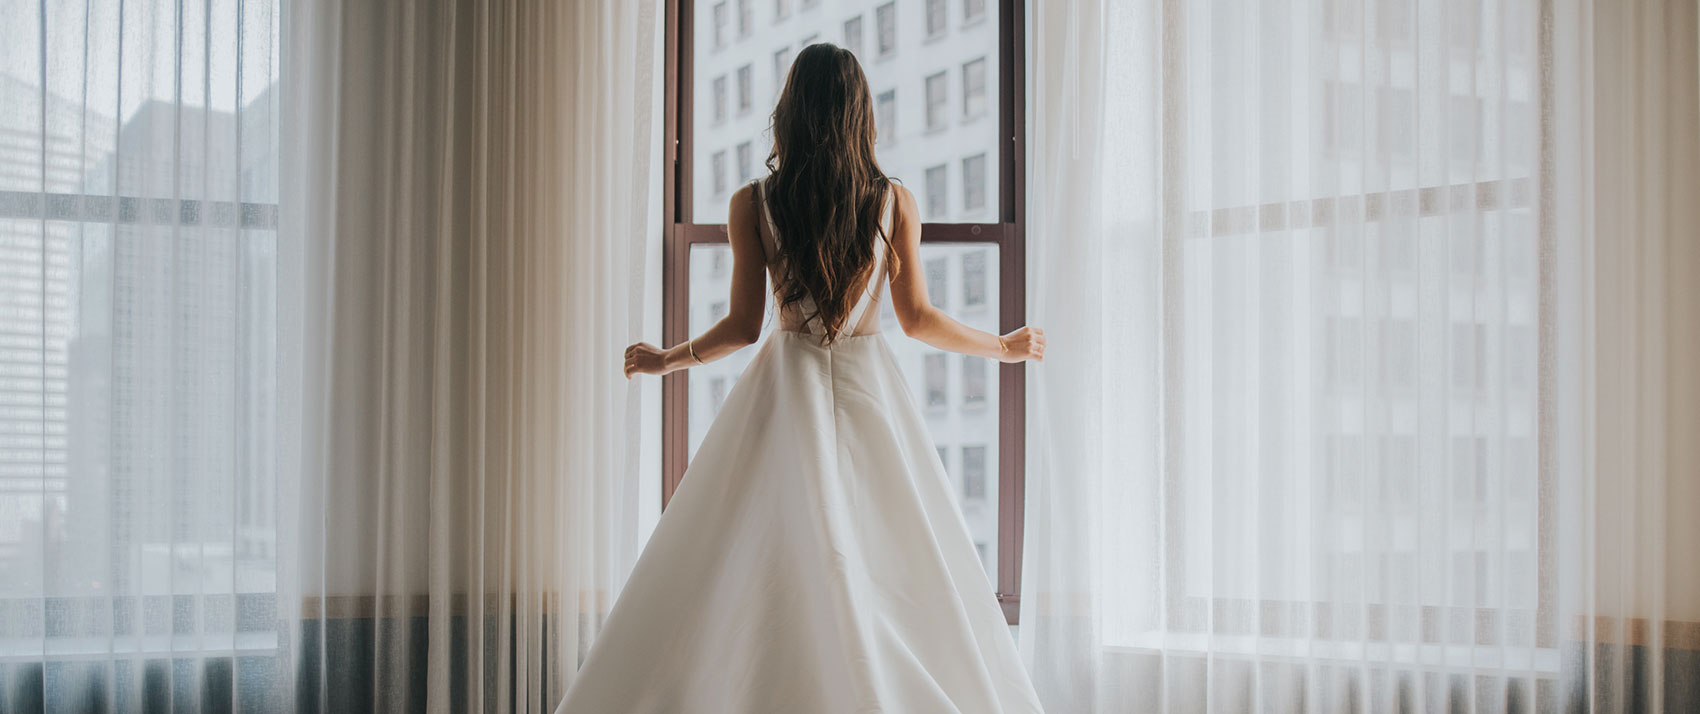 Vows There, Stay Here Brand Image. Bride standing in white wedding dress around window